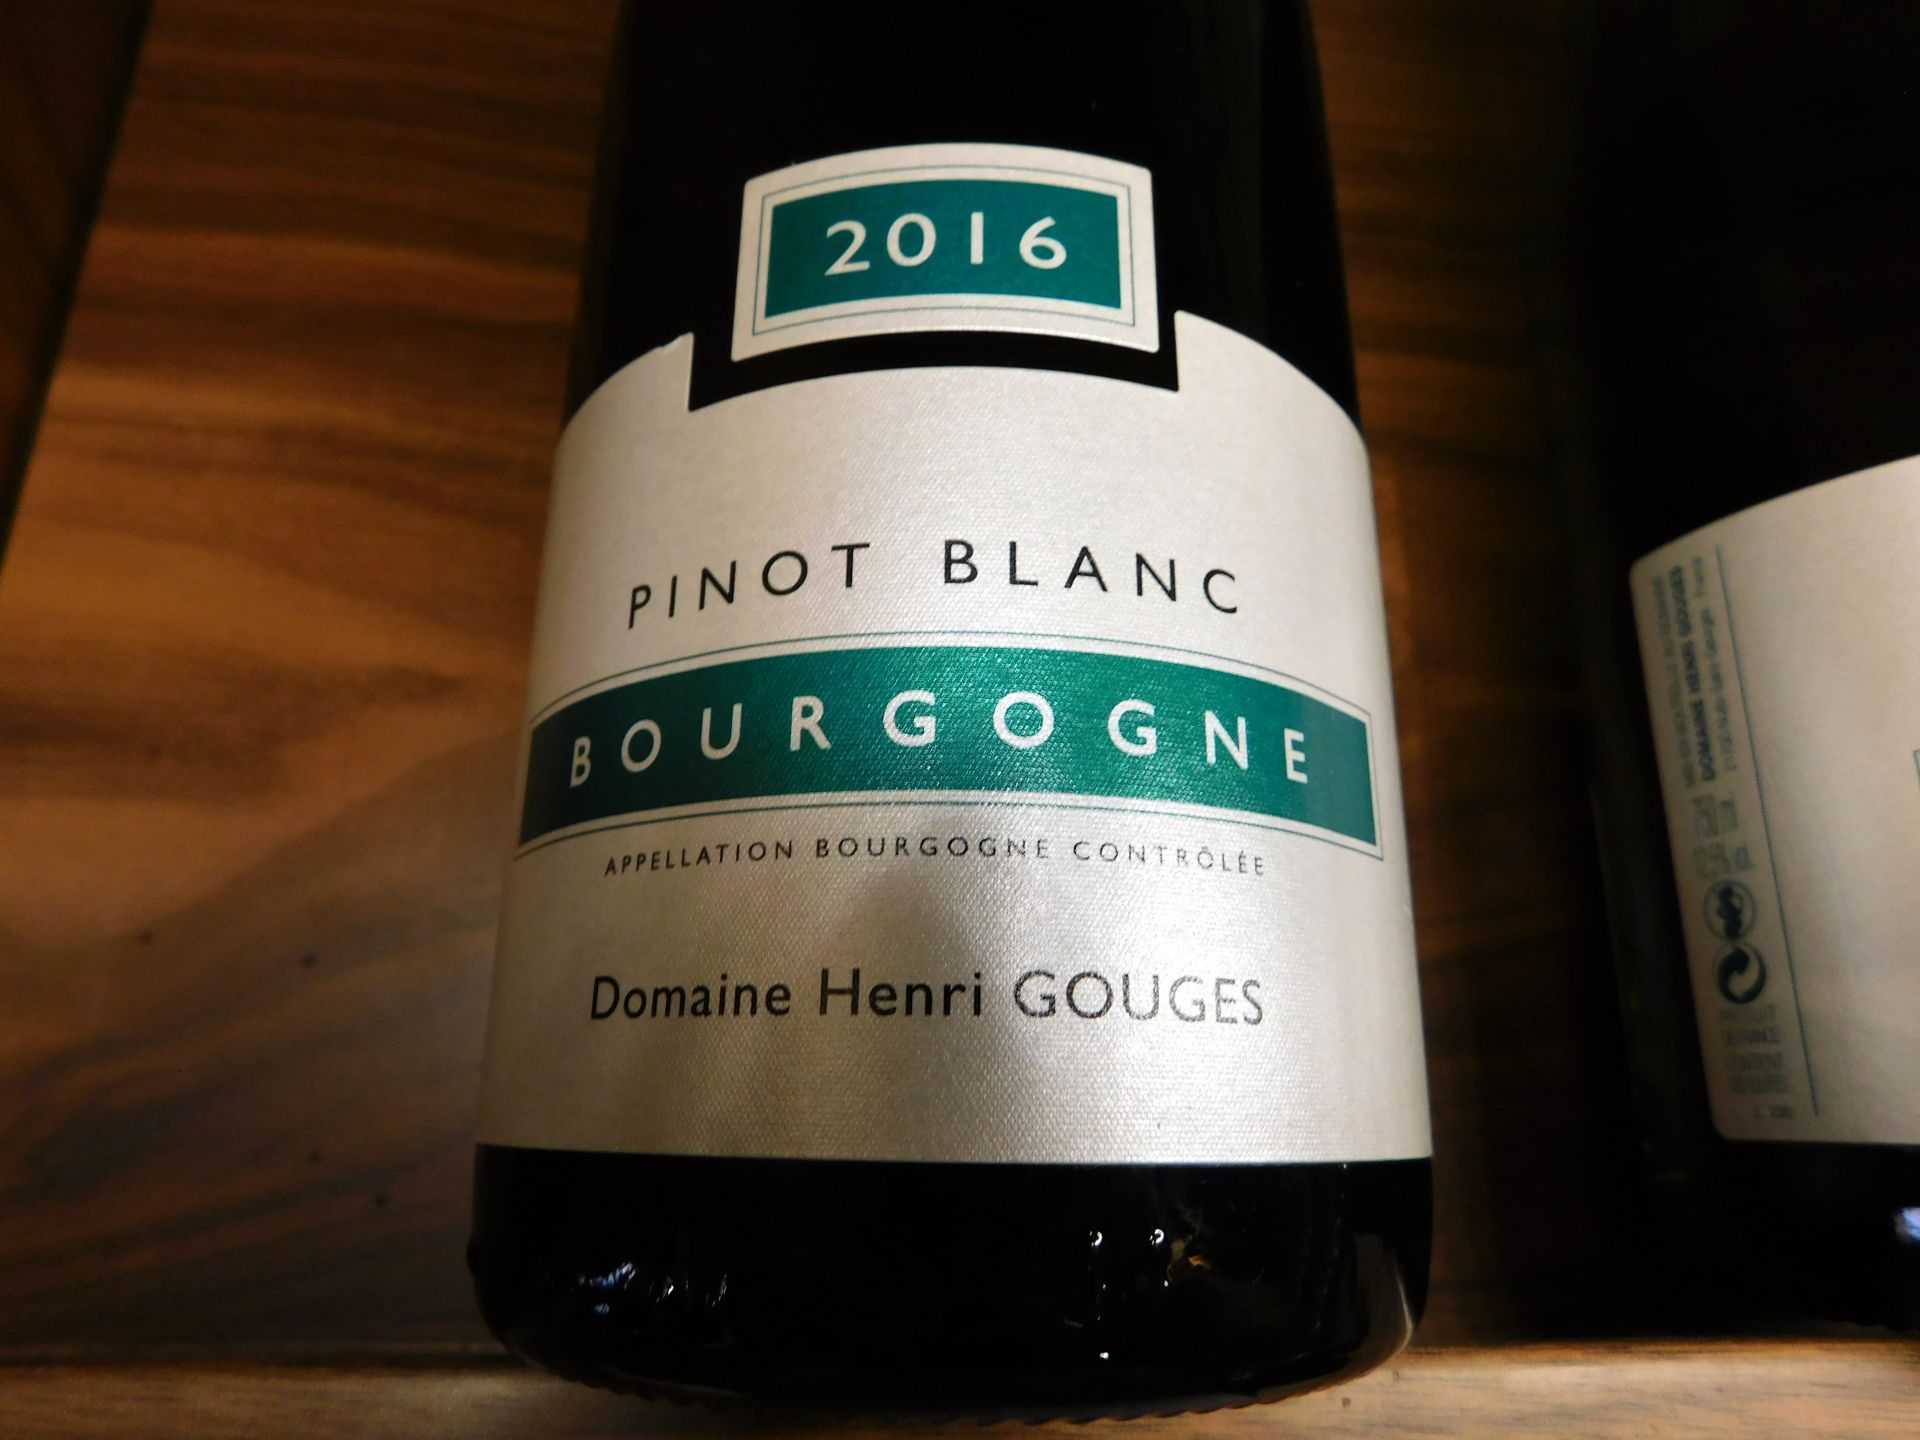 4 Bourgogne Pinot Blanc 2016 (Location: Brentwood. Please Refer to General Notes) - Image 2 of 2